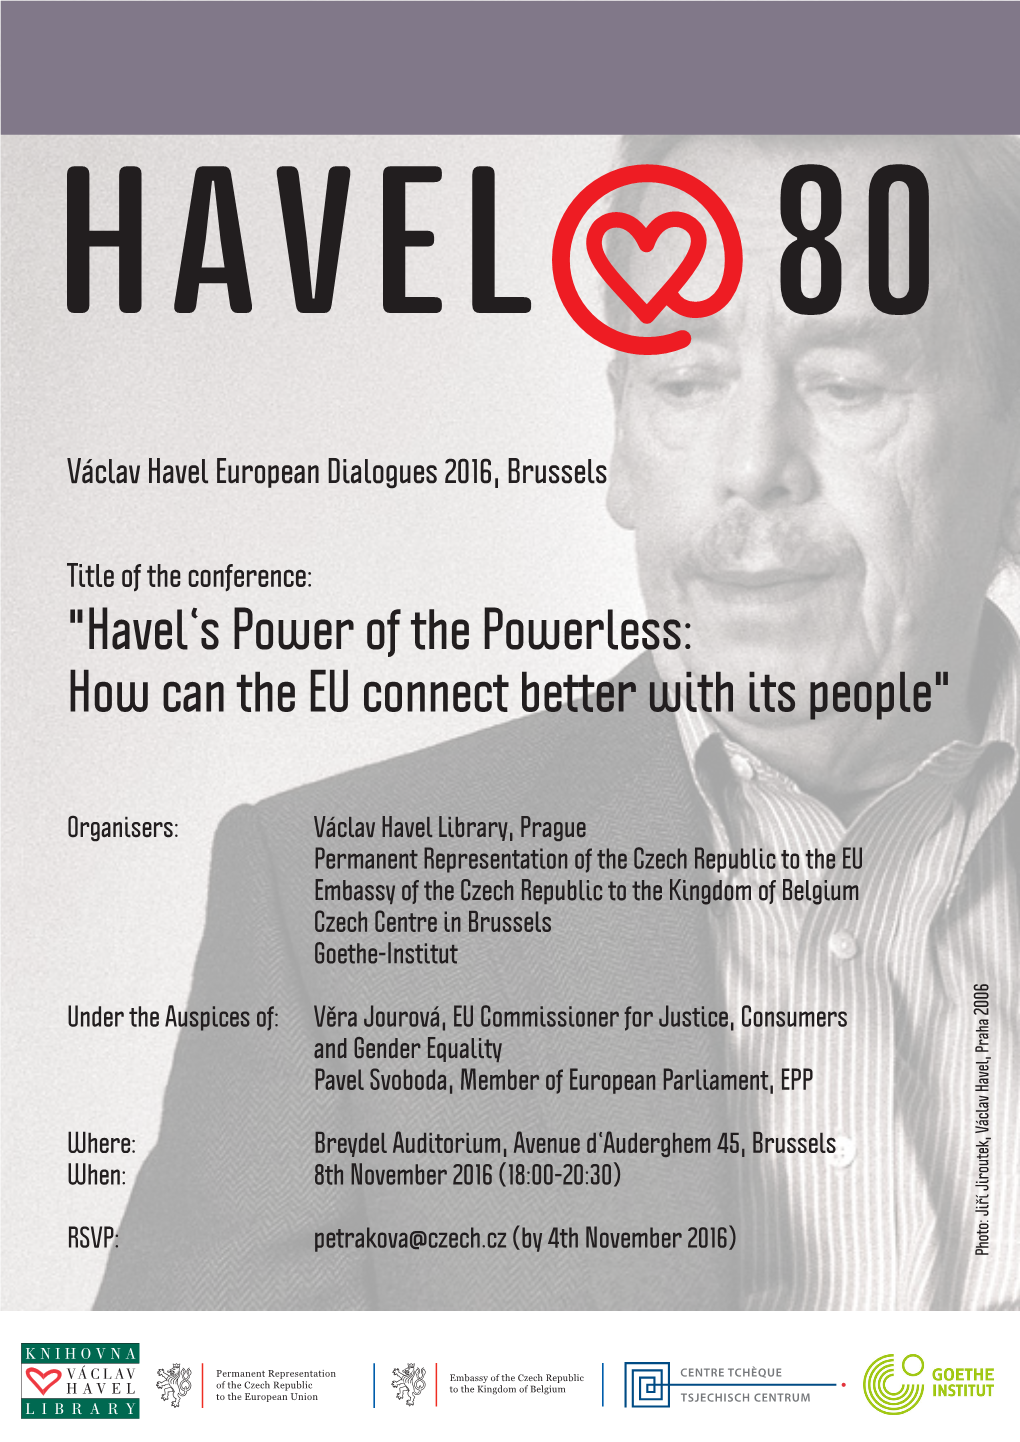 "Havel's Power of the Powerless: How Can the EU Connect Better With